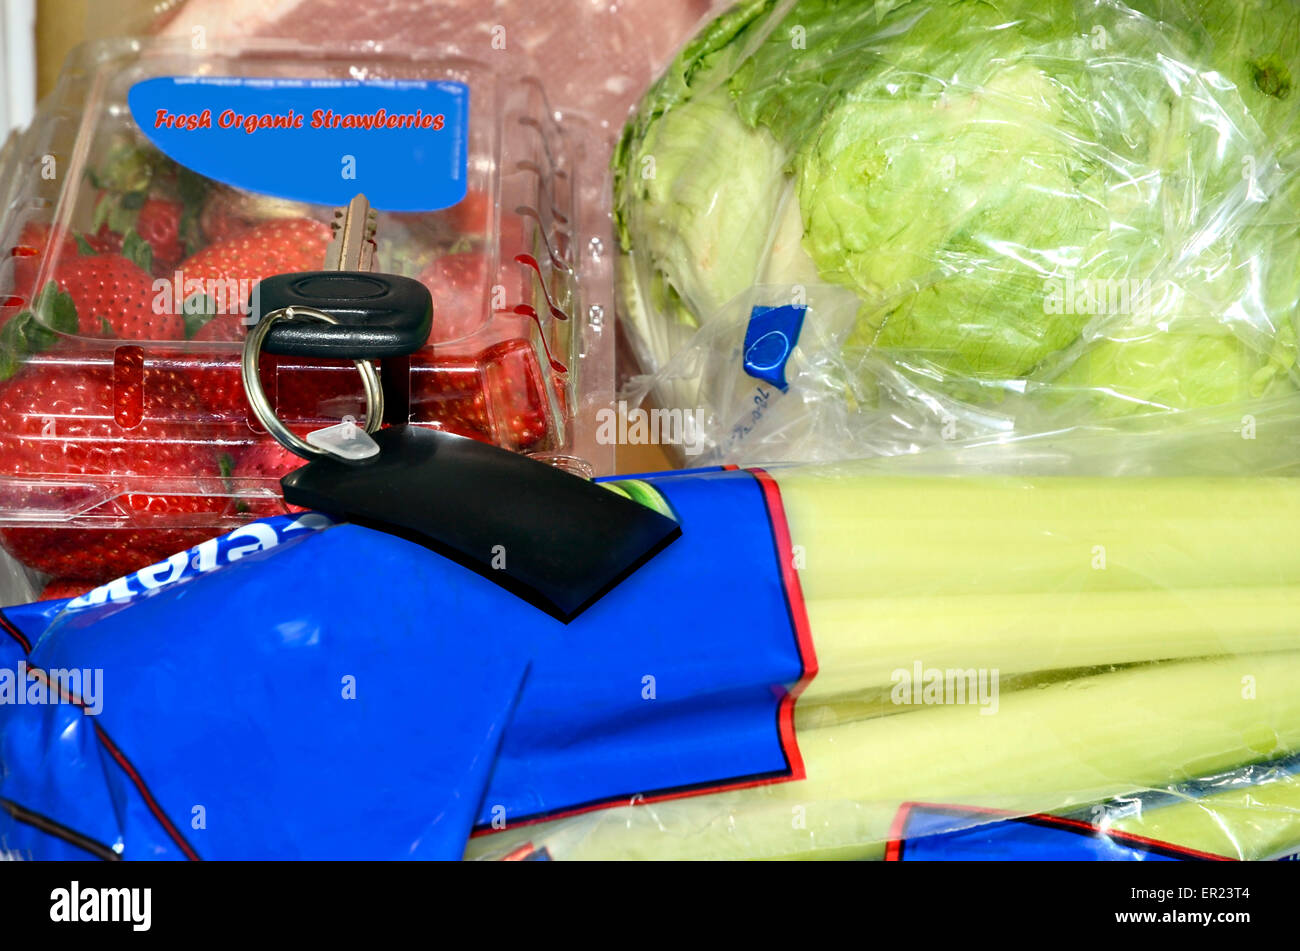 A key left with the produce.  This could be in a store, or a home, a concept for misplacing items and memory loss. Stock Photo